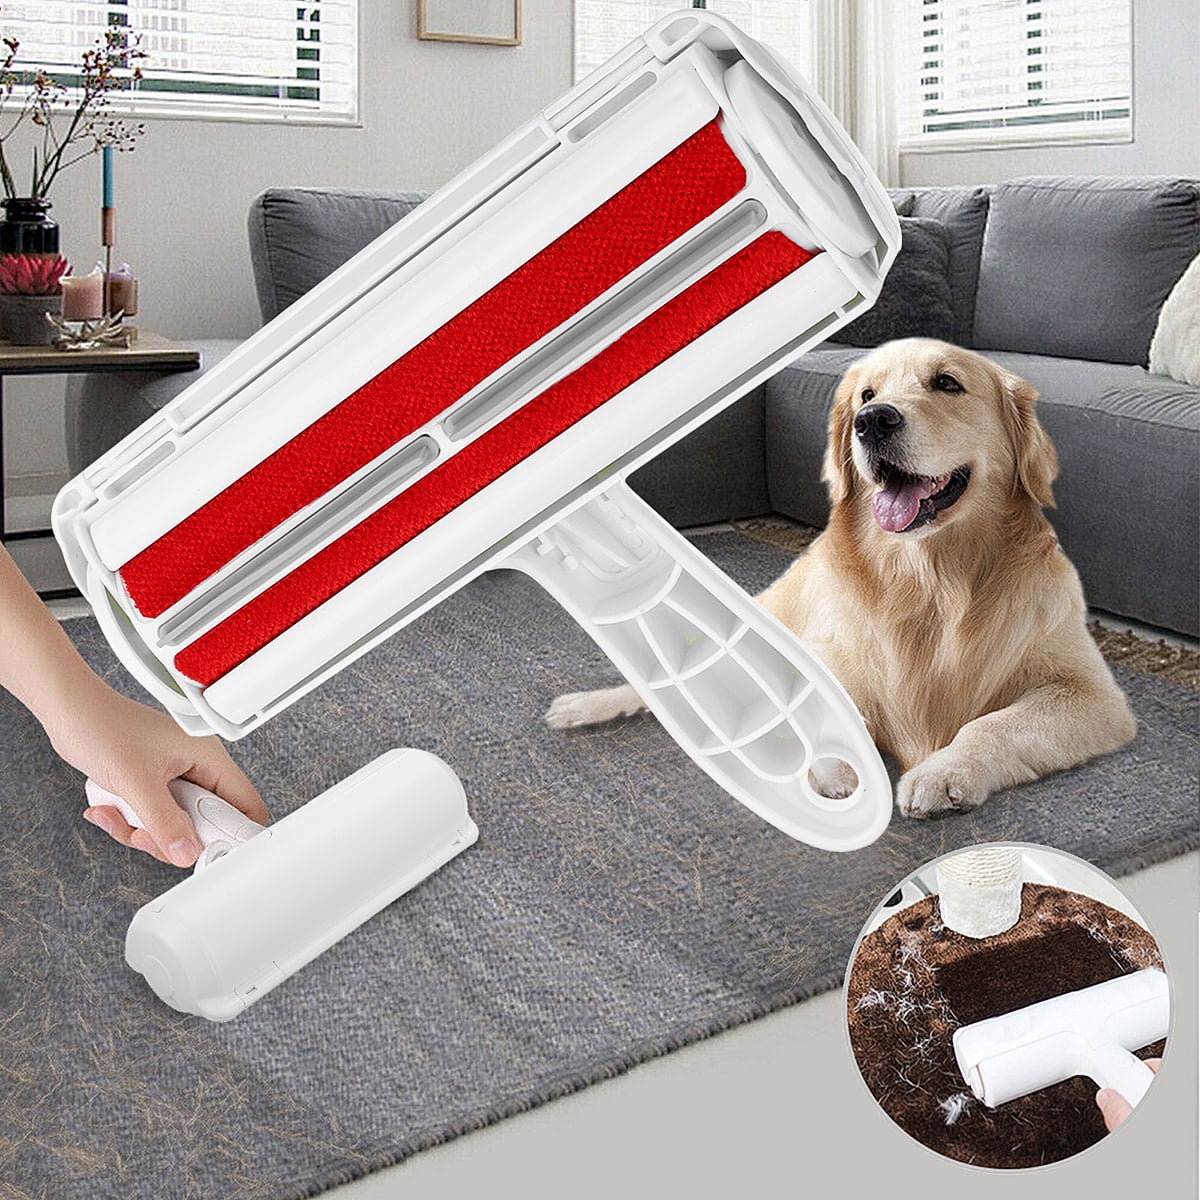 Chomchom Roller Dog Hair Remover Stores